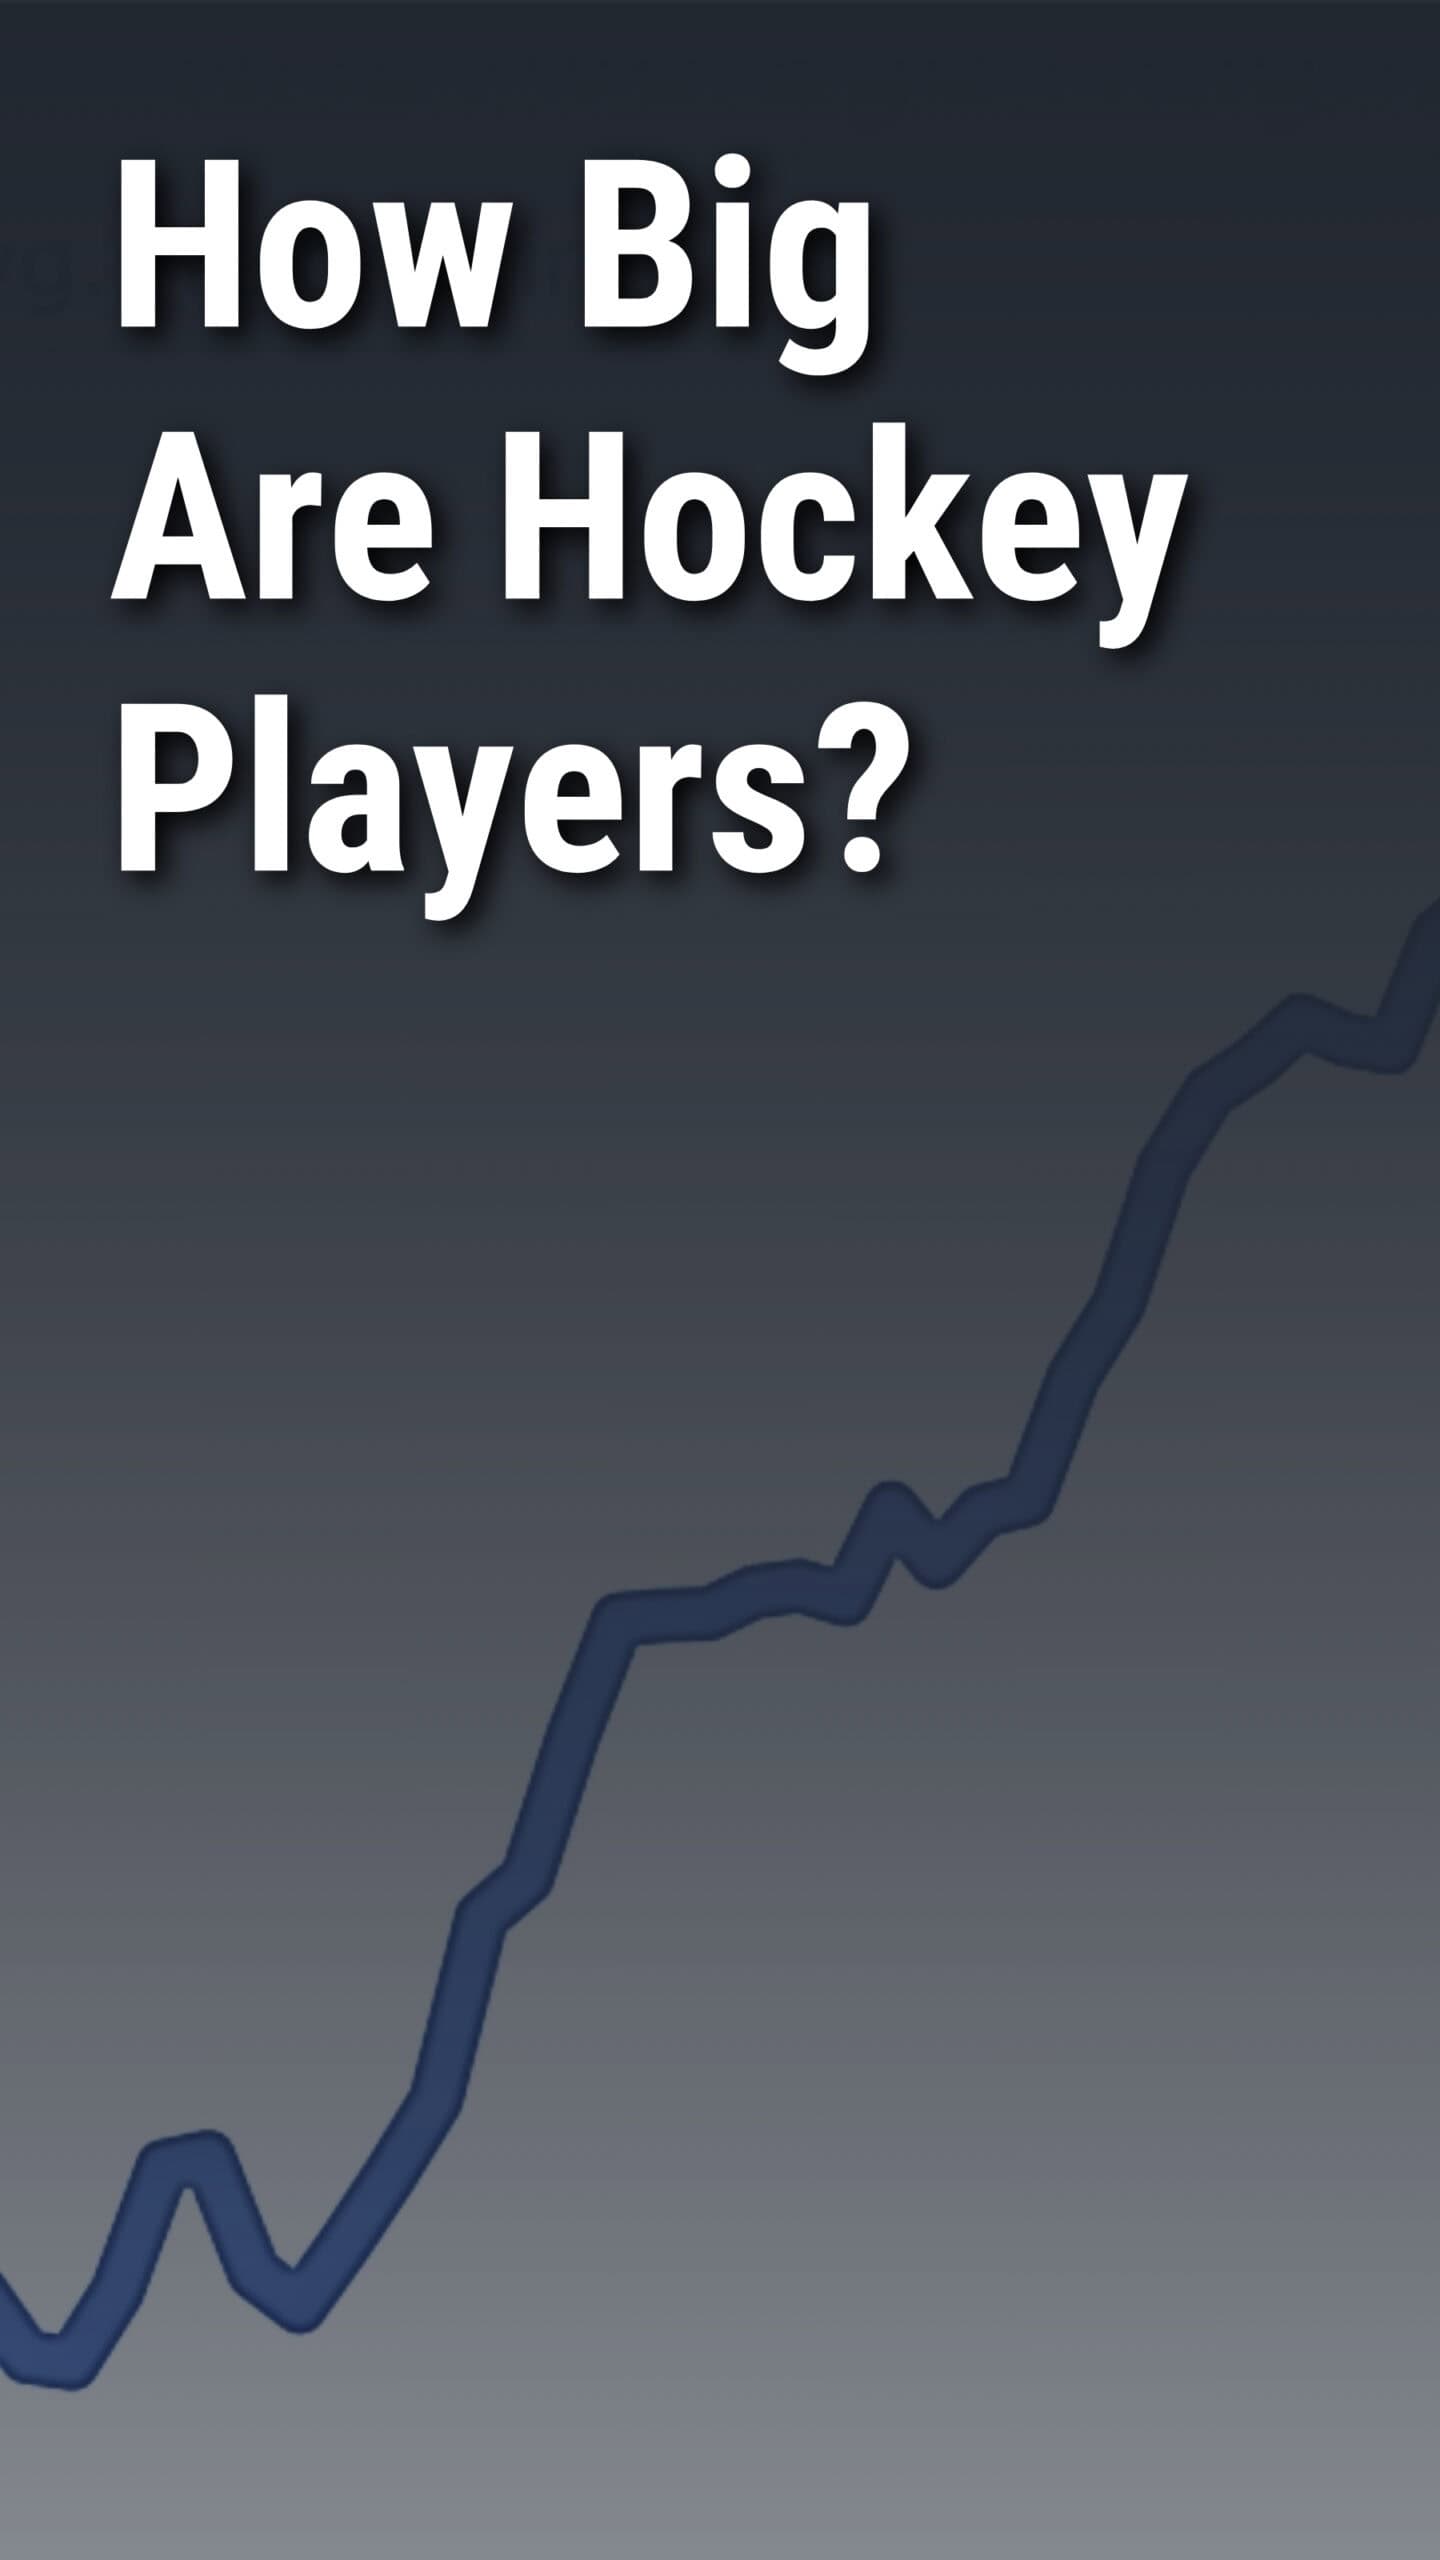 How Big Are Hockey Players